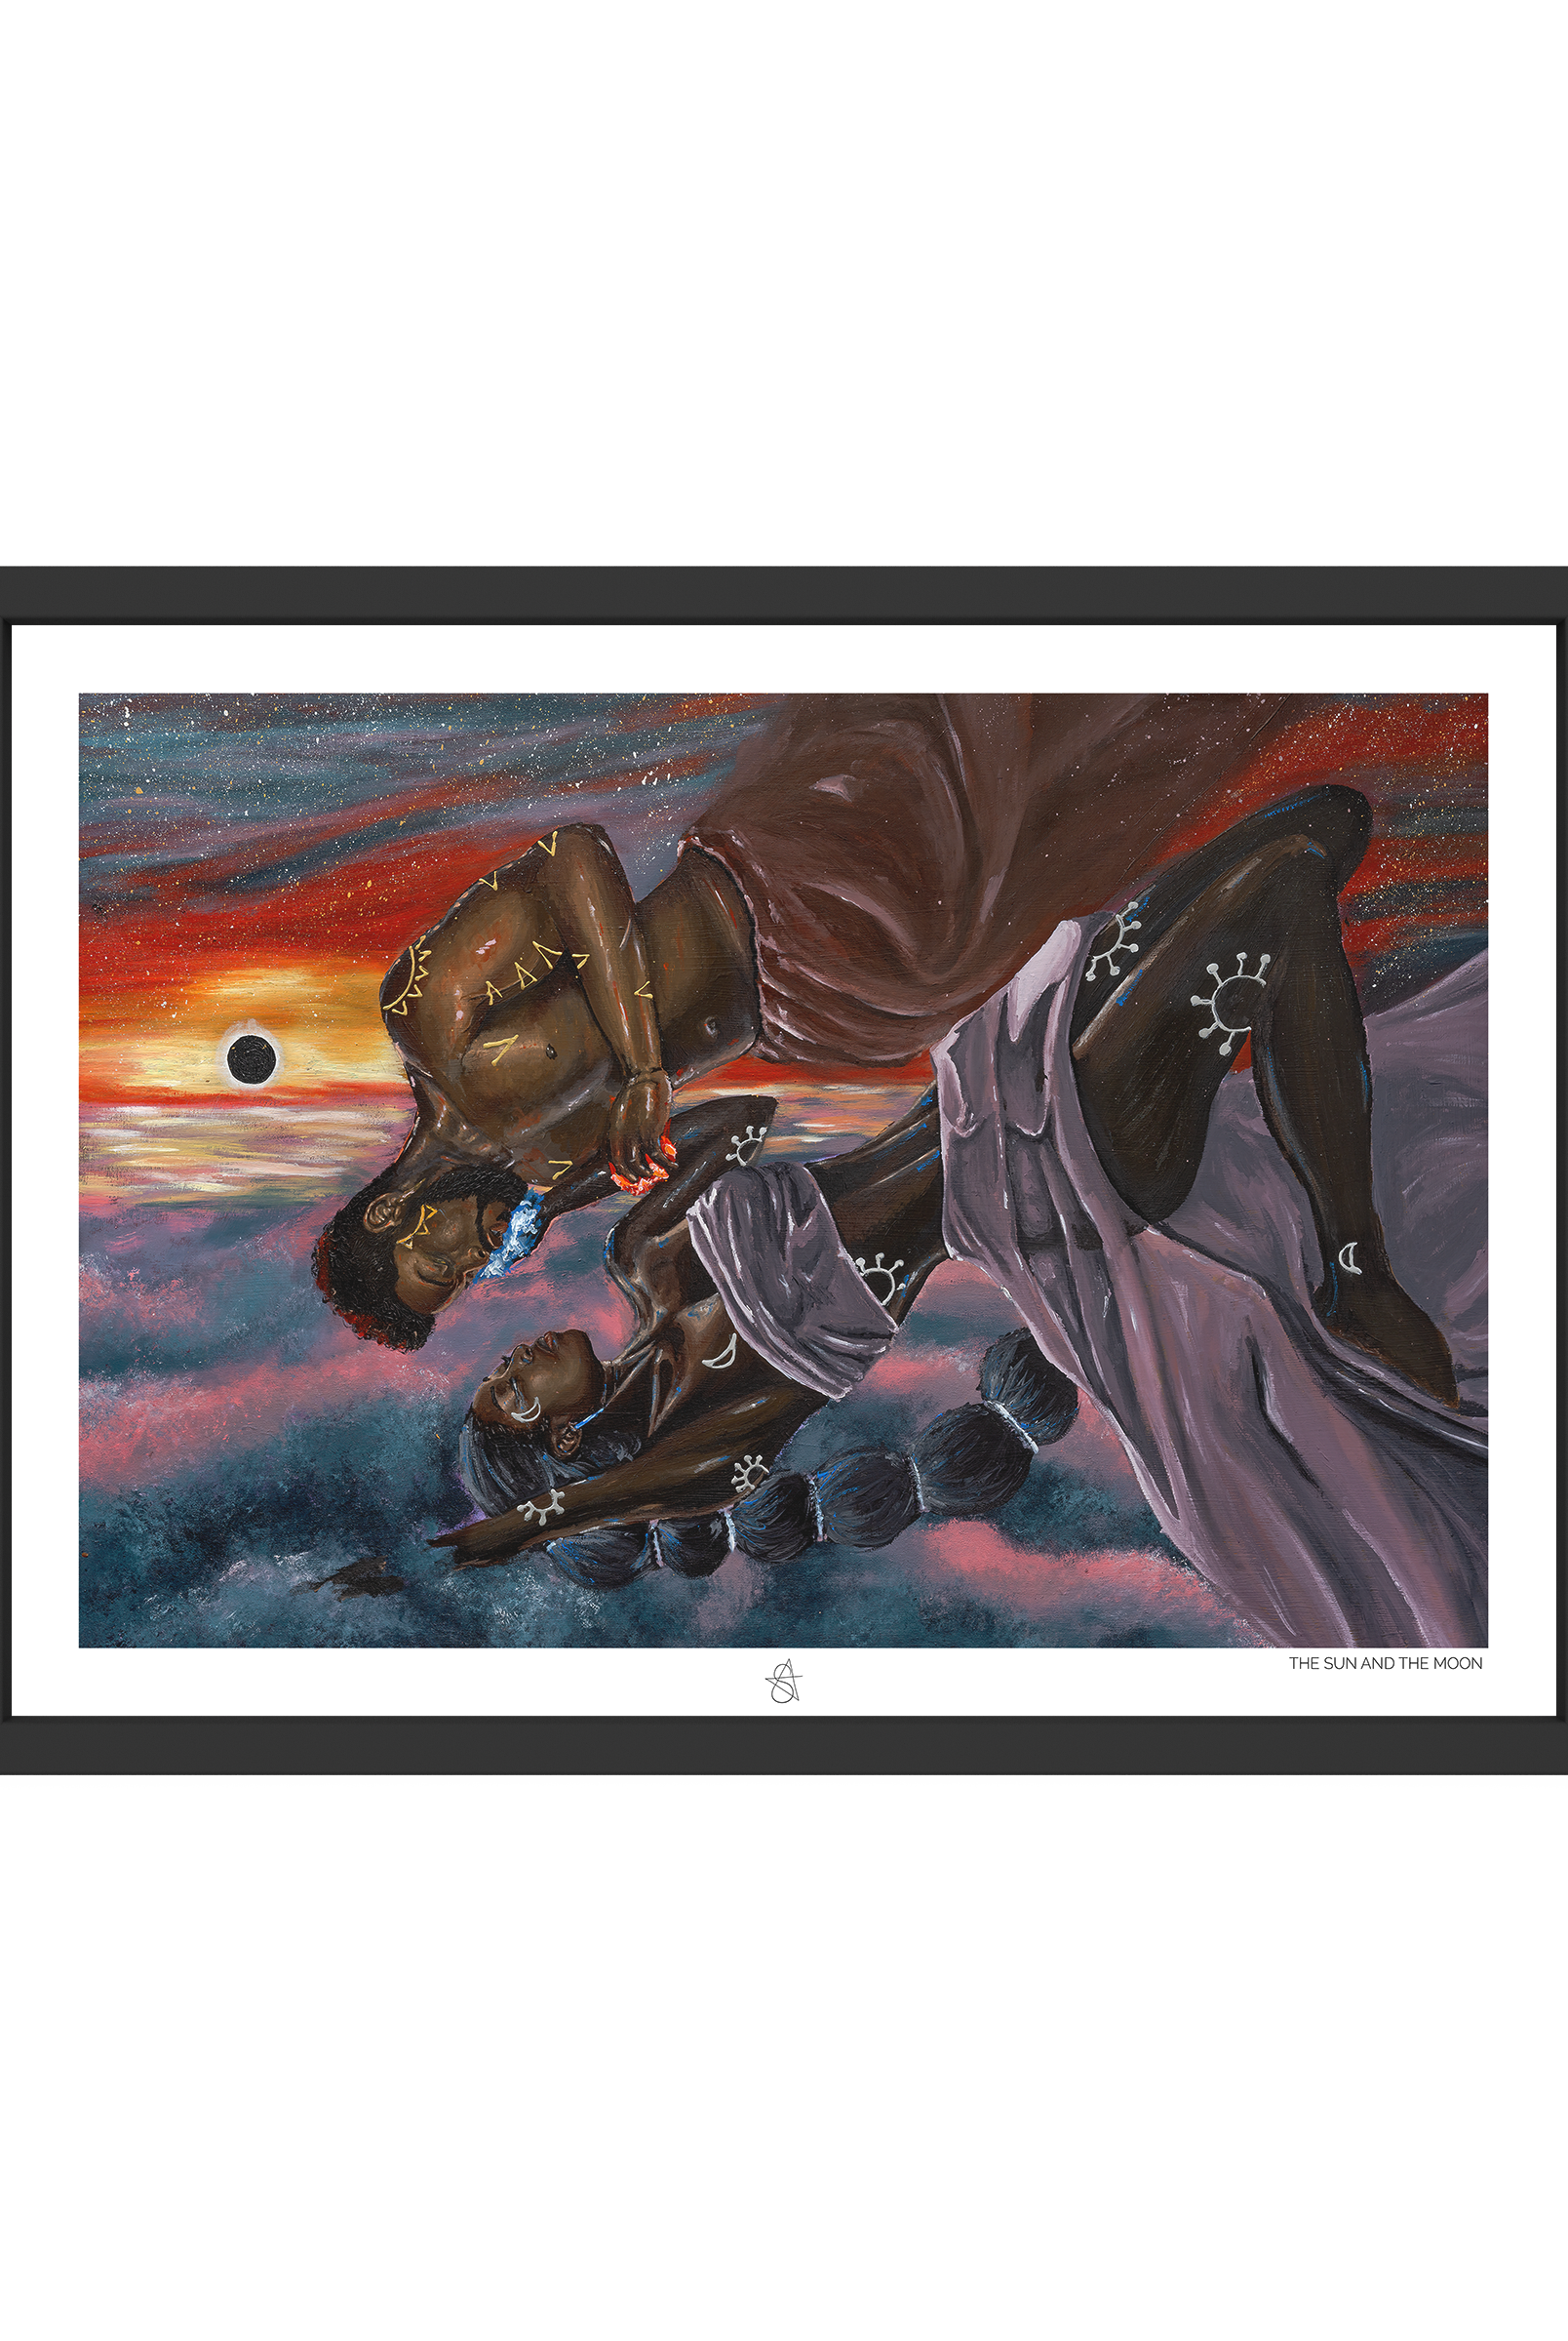 The Sun and The Moon Art Print on high-quality matte or velvet paper, framed in gallery black, white, or natural maple, depicting the Krachi folktale about how the Sun and the Moon fell in love